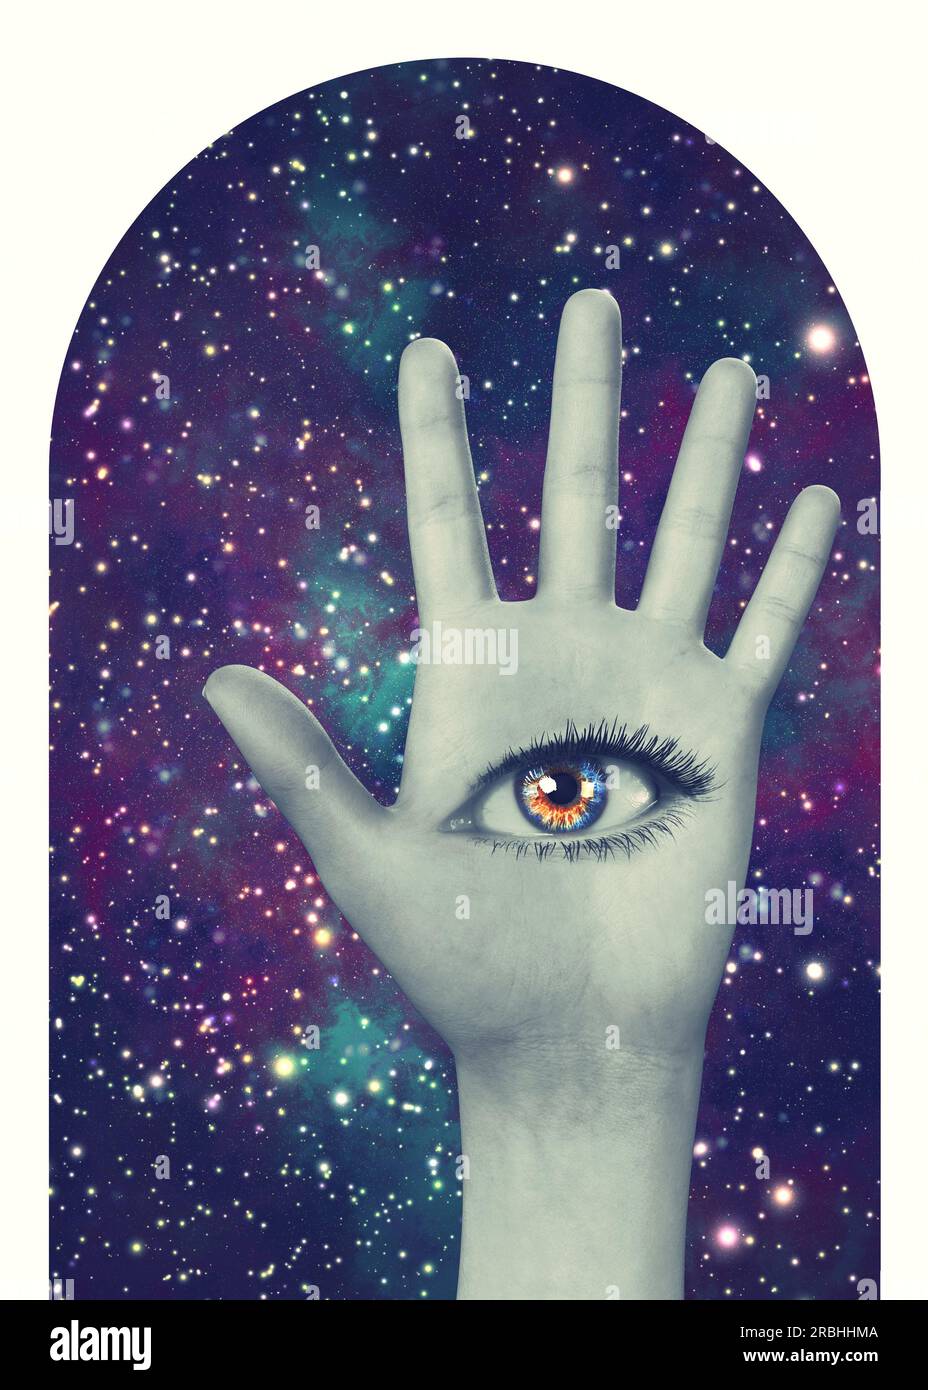 Surreal illustration with 3D hand and eye in the starry space background. 3D illustration Stock Photo